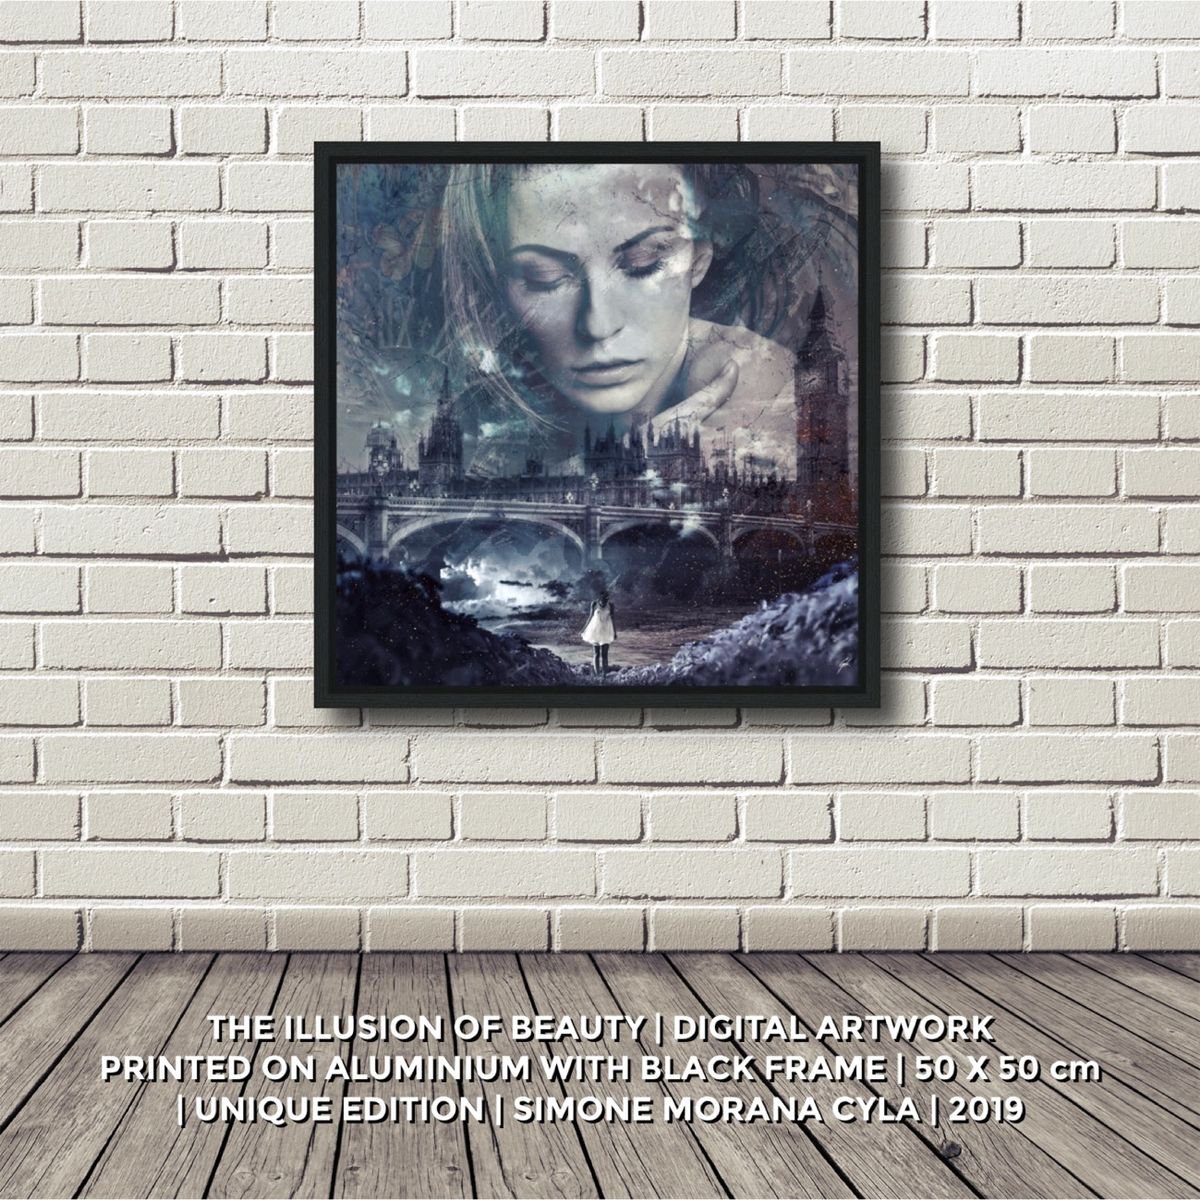 THE ILLUSION OF BEAUTY | Digital Painting printed on Alu-Dibond with Black wood frame | Unique Artwork | 2019 | Simone Morana Cyla | 50 x 50 cm | Art Gallery Quality |